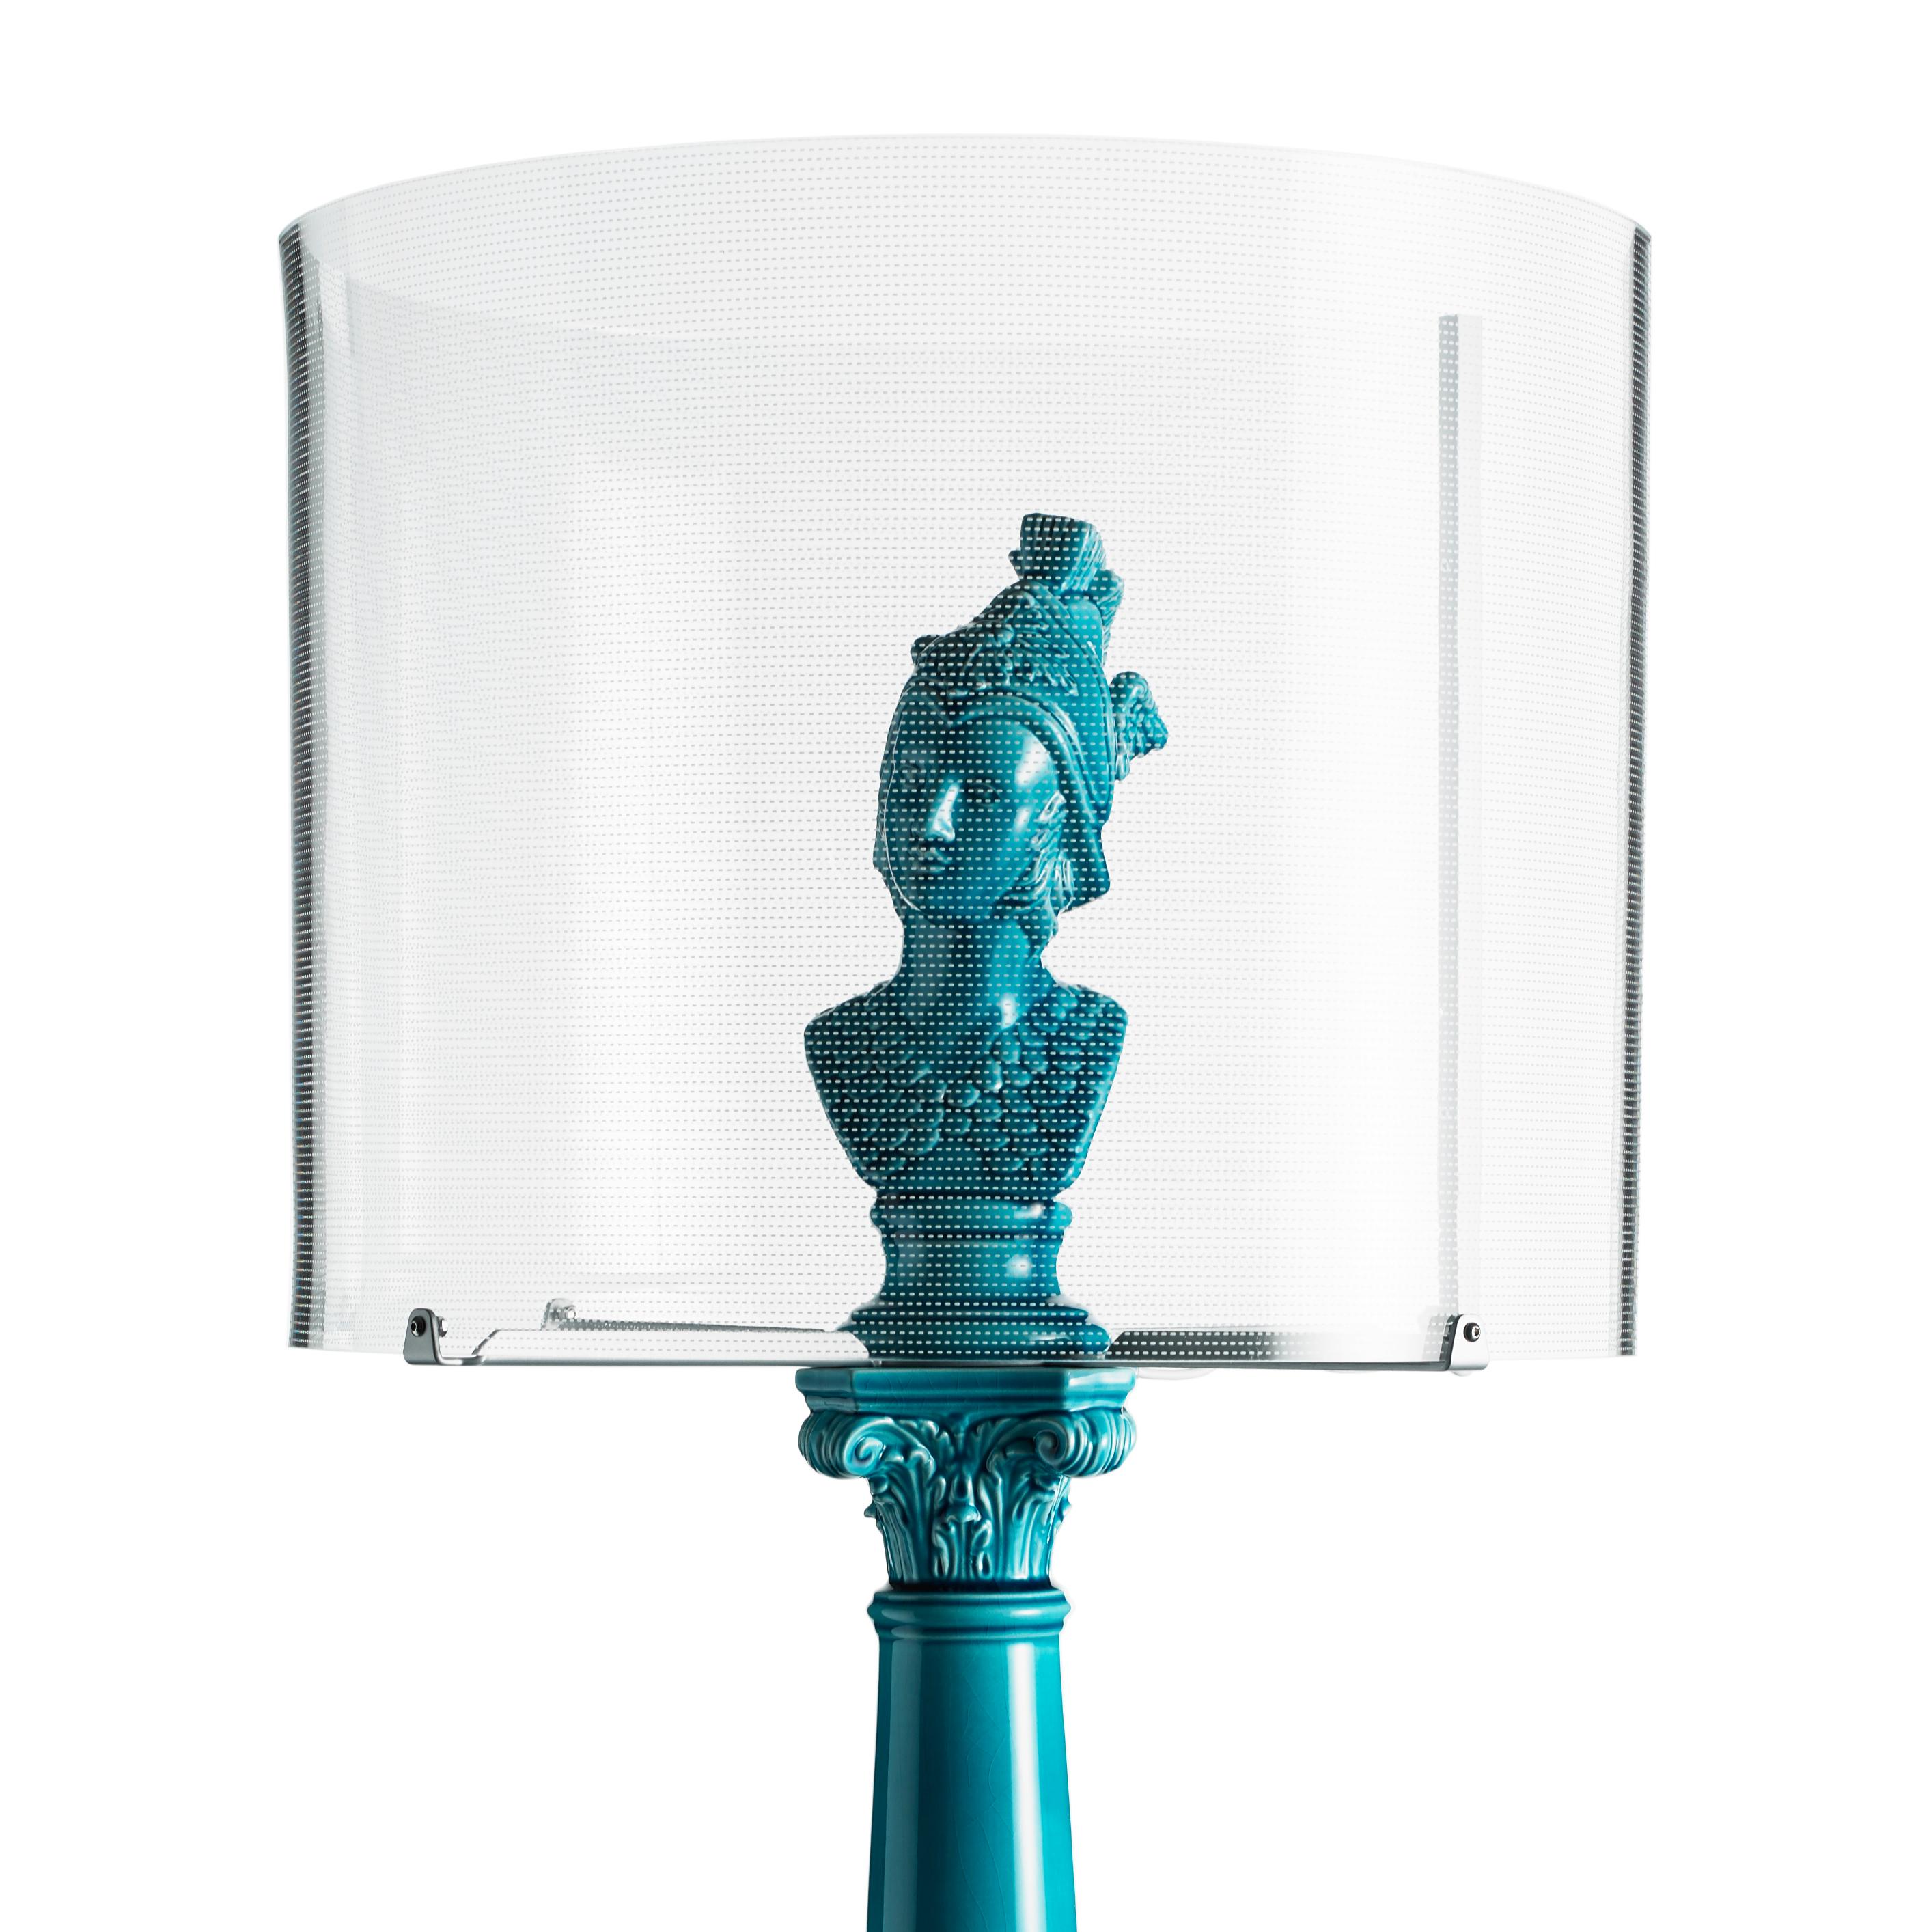 Ermes Touch Lamp, Turquoise In New Condition For Sale In Mantova, MN